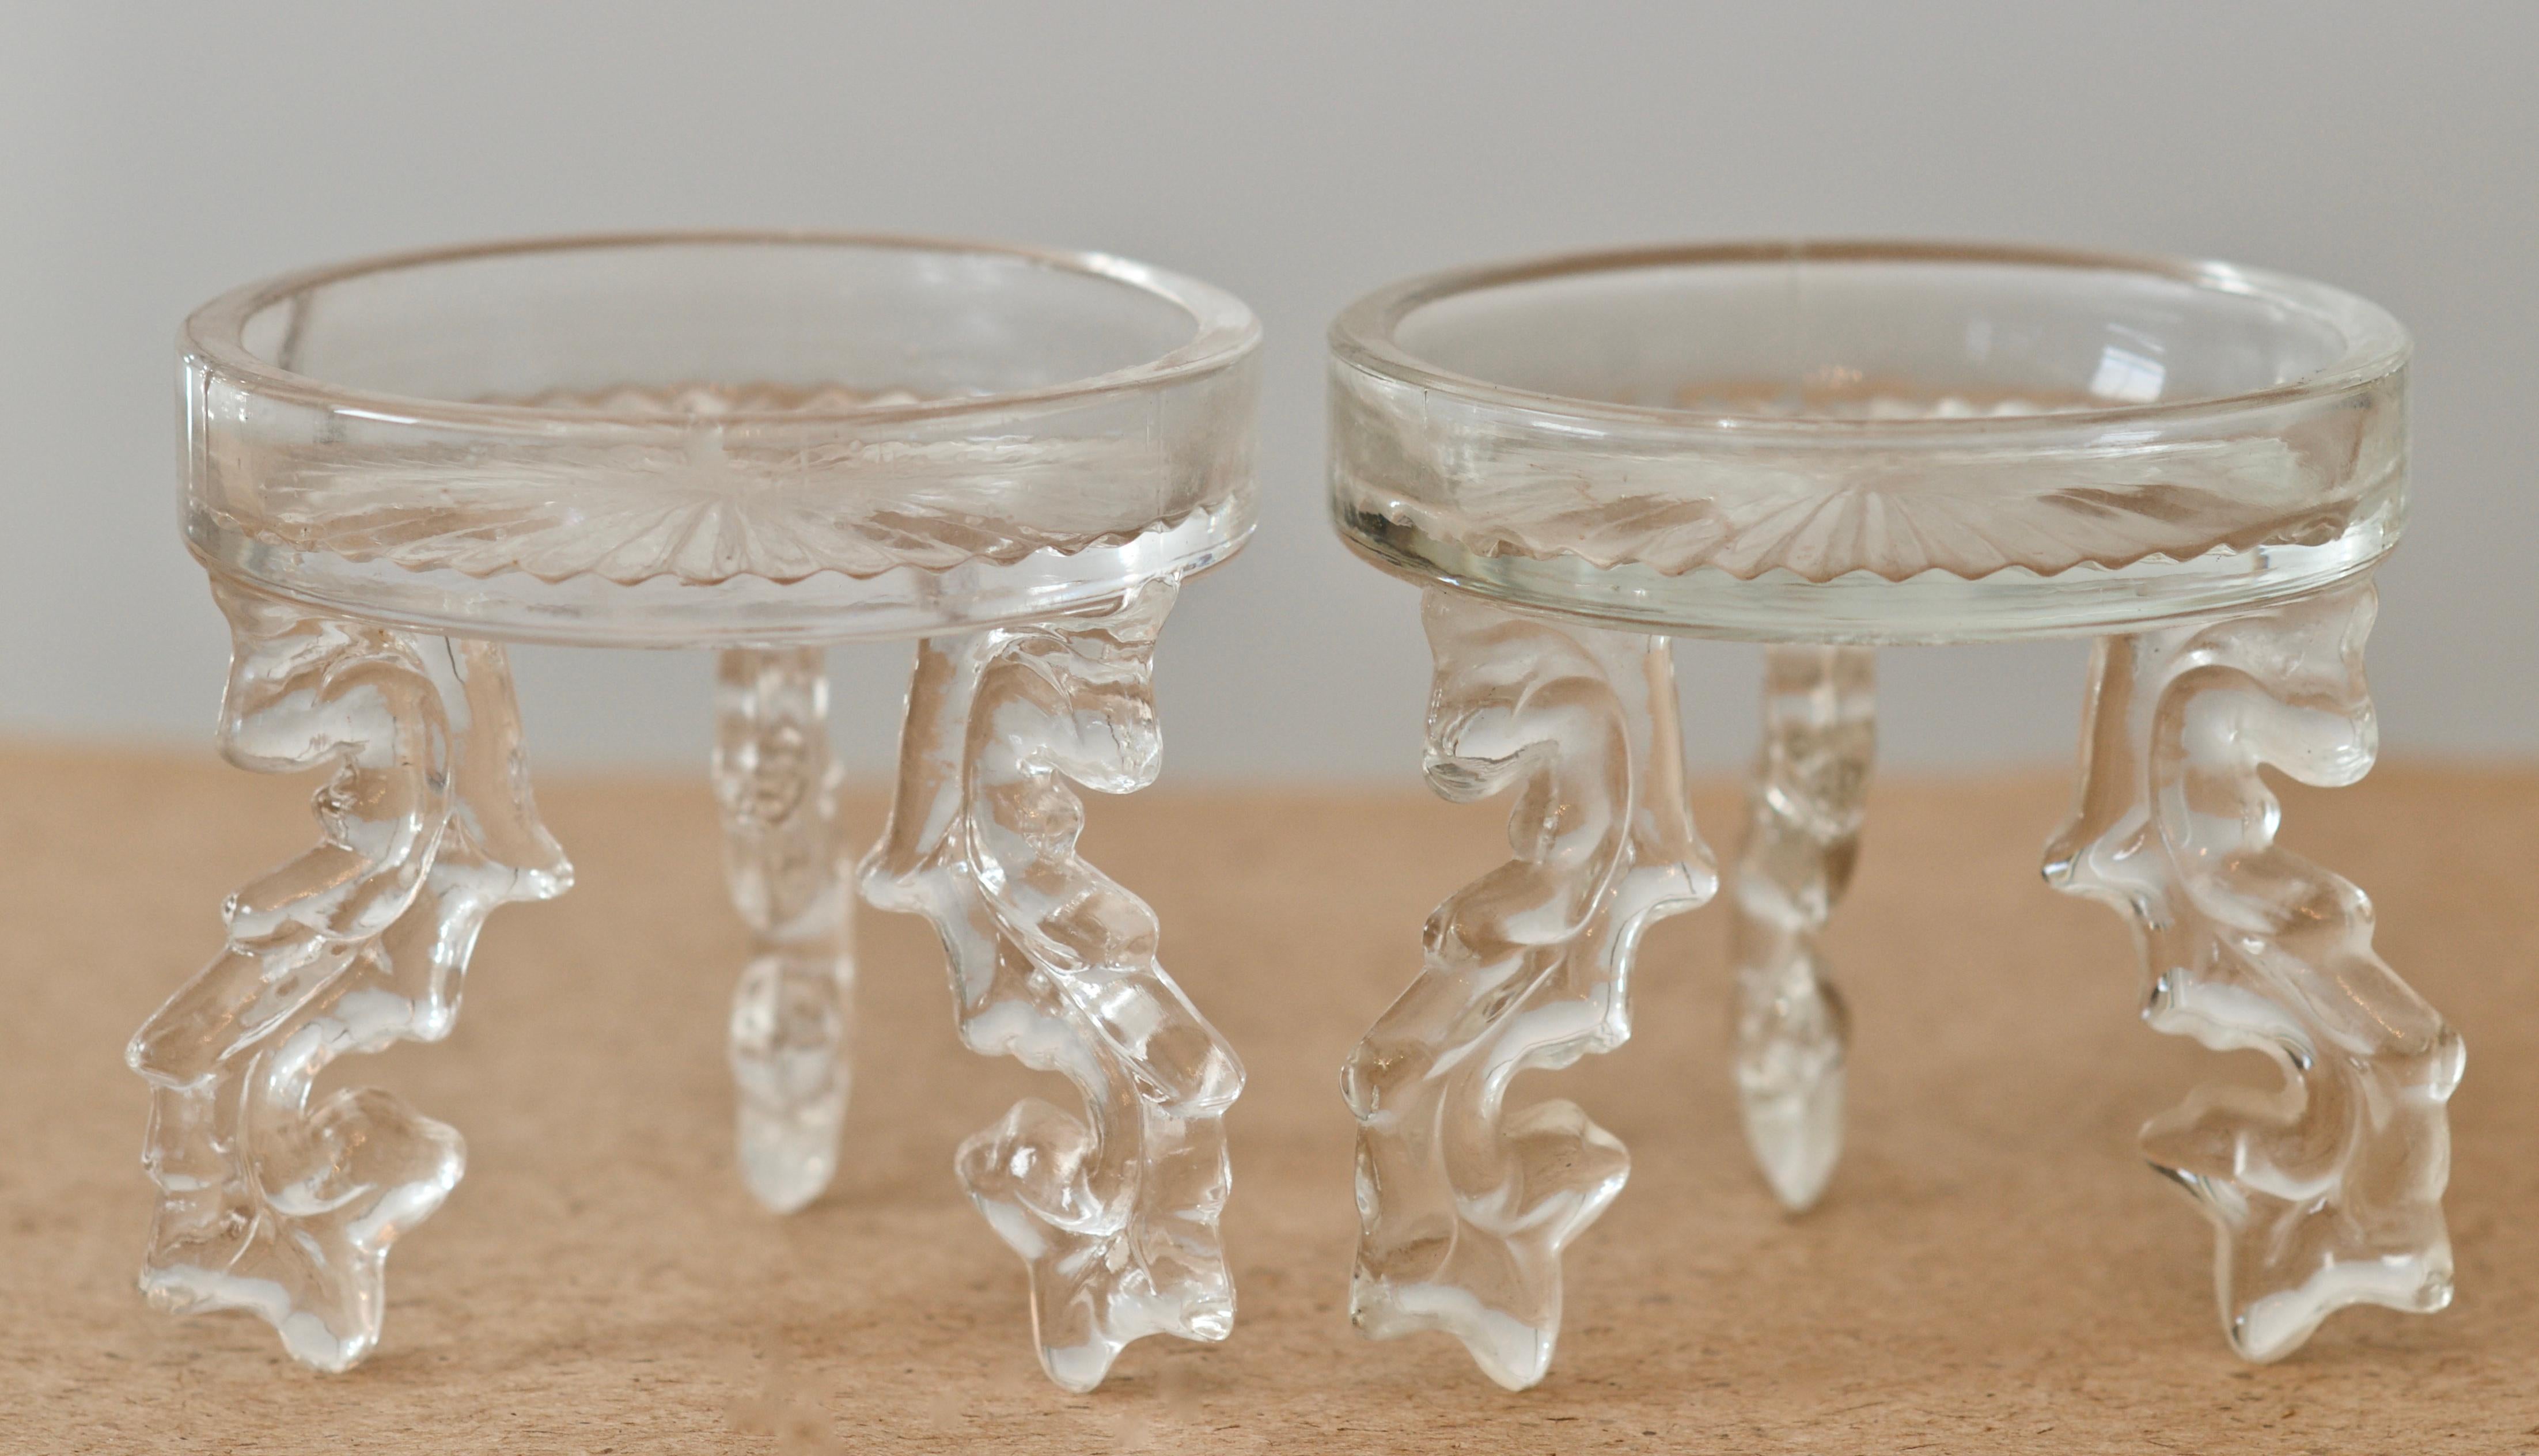 Pair of simple yet beautifully elegant chinoiserie glass pillar candle holders. Measures 3.75